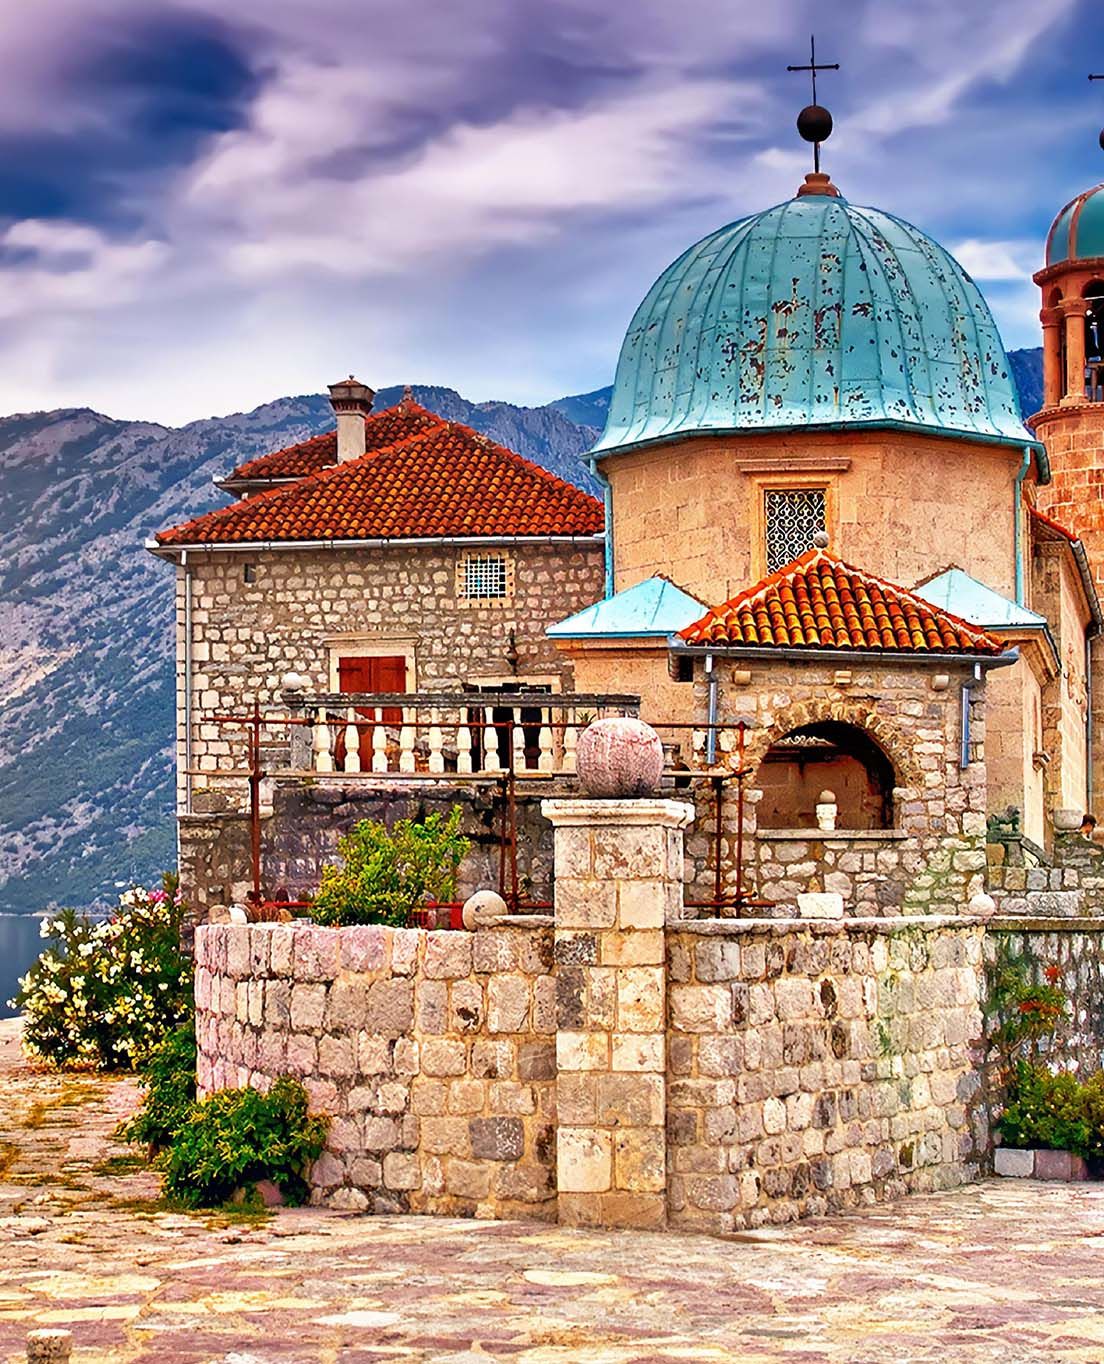 Montenegro at a glance